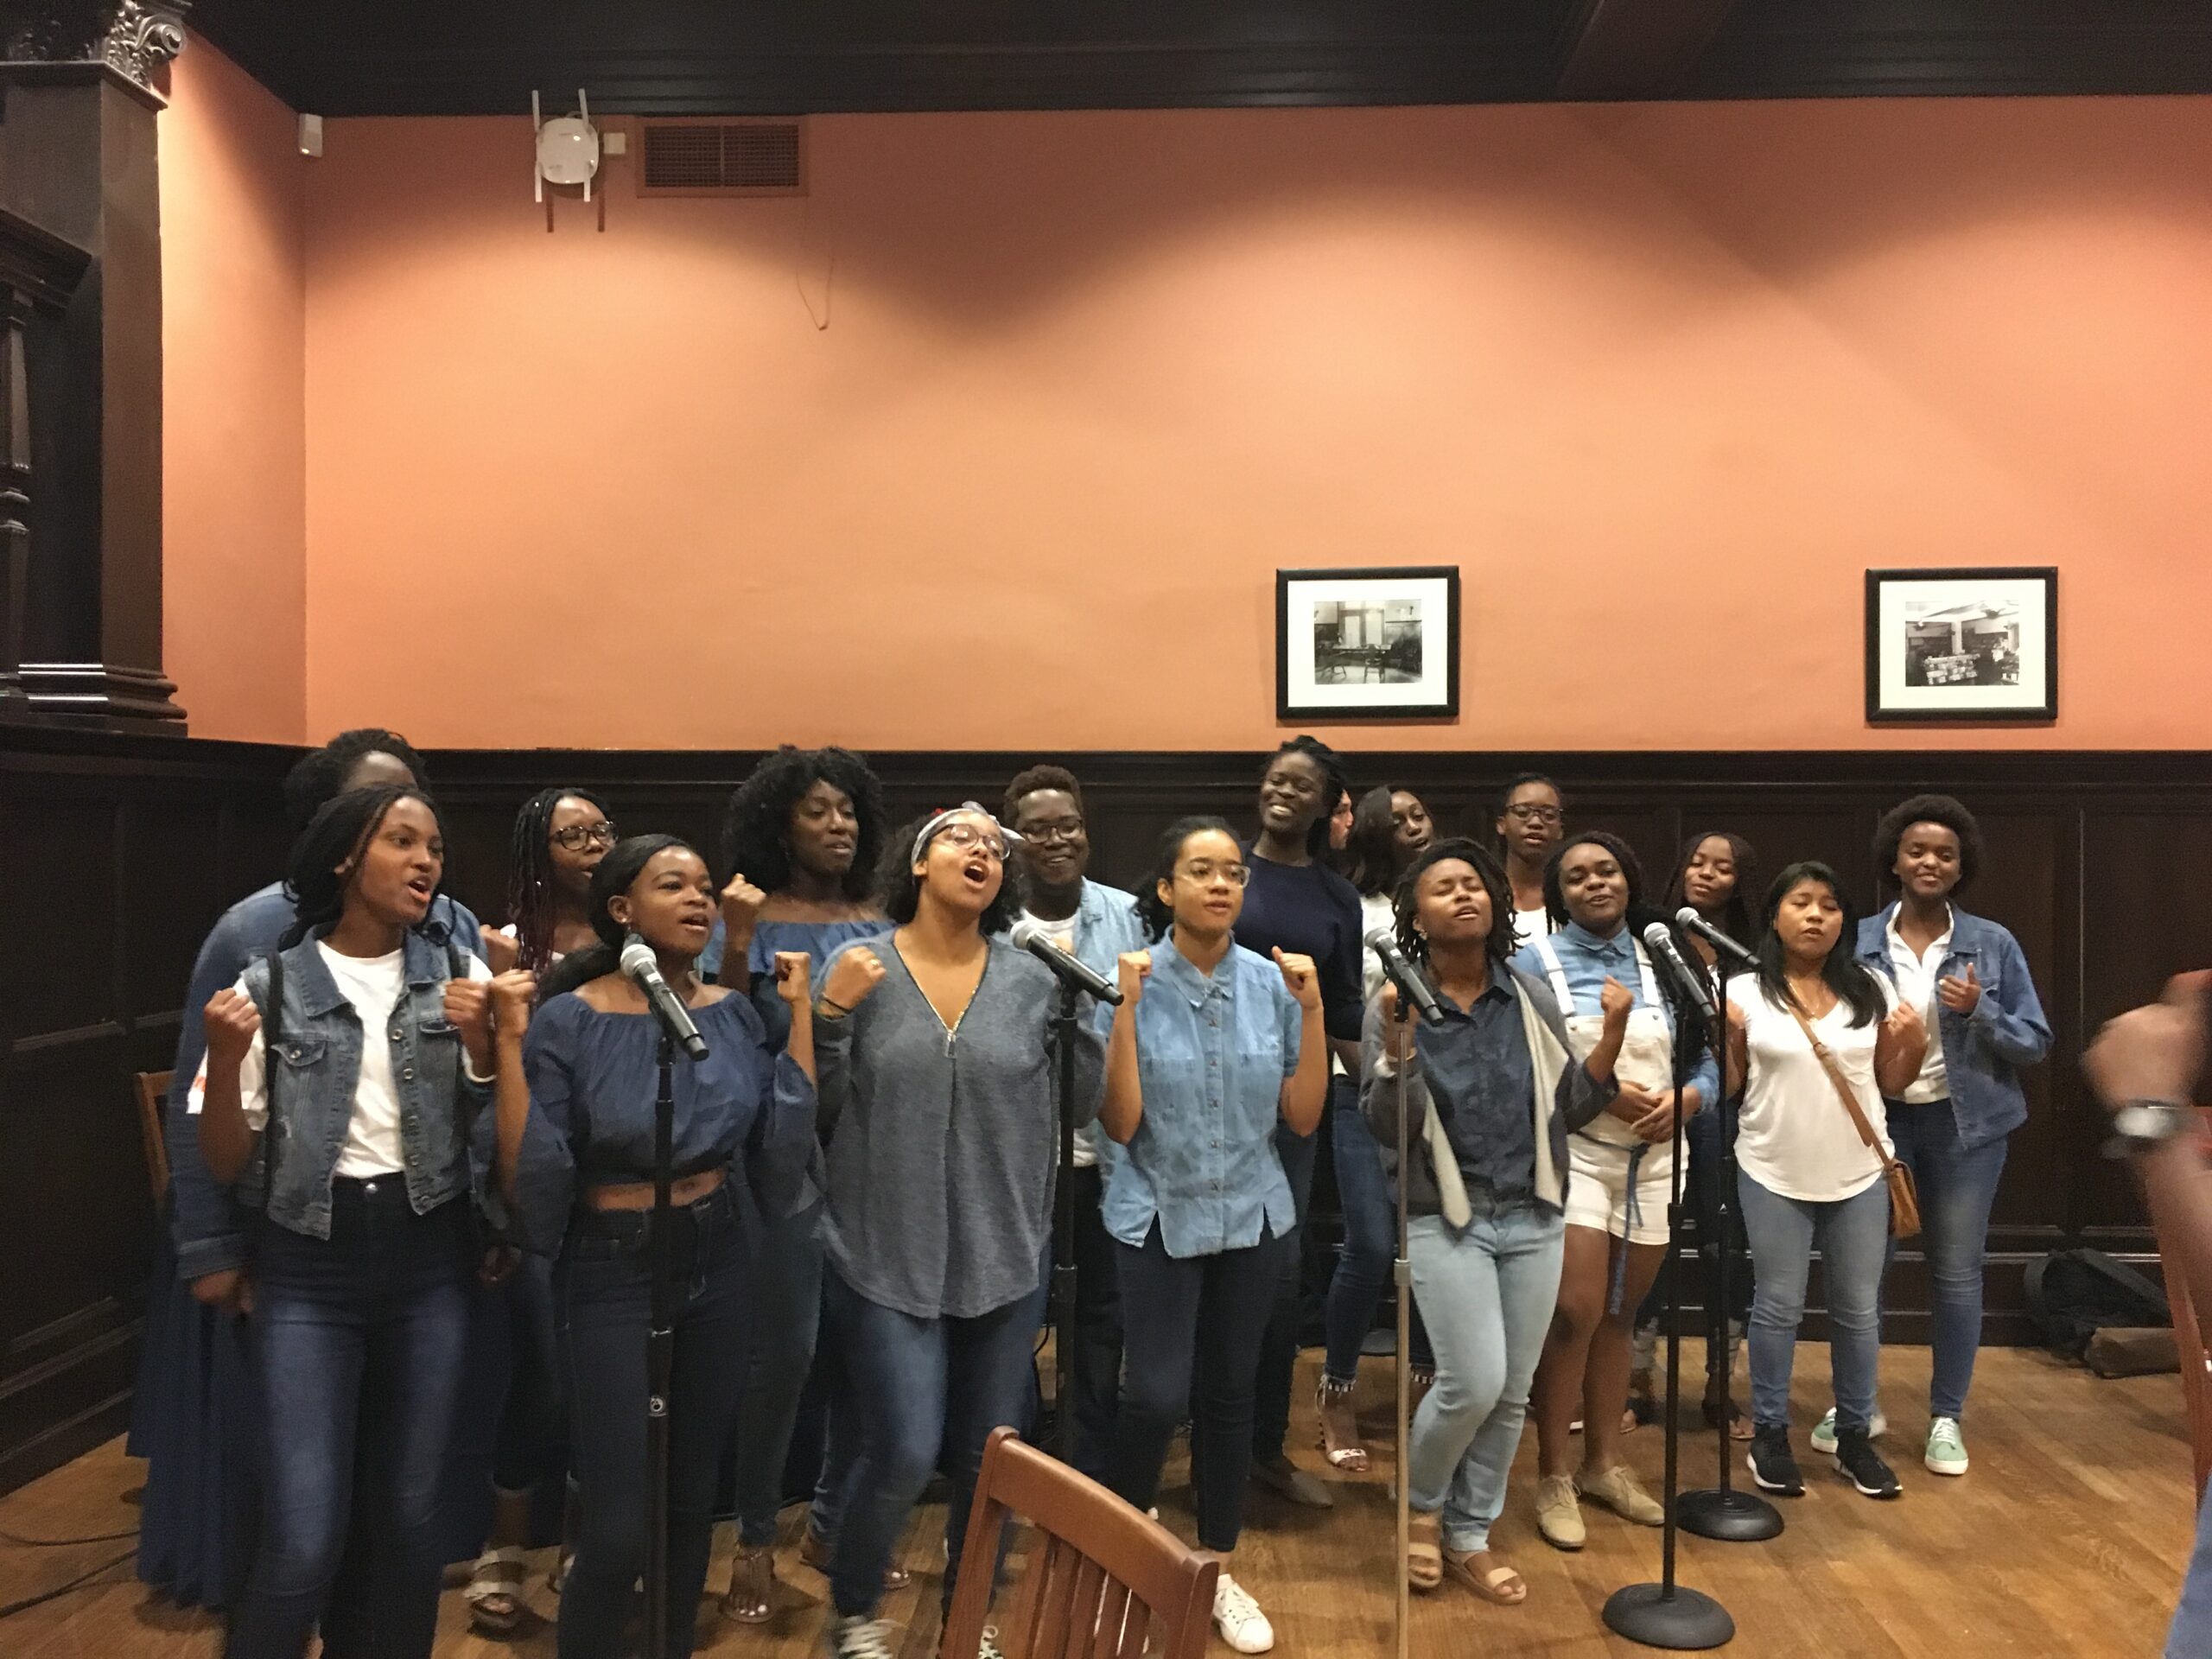 New Spirit of Penn, an a cappella troupe, performs in the Houston Hall Reading room